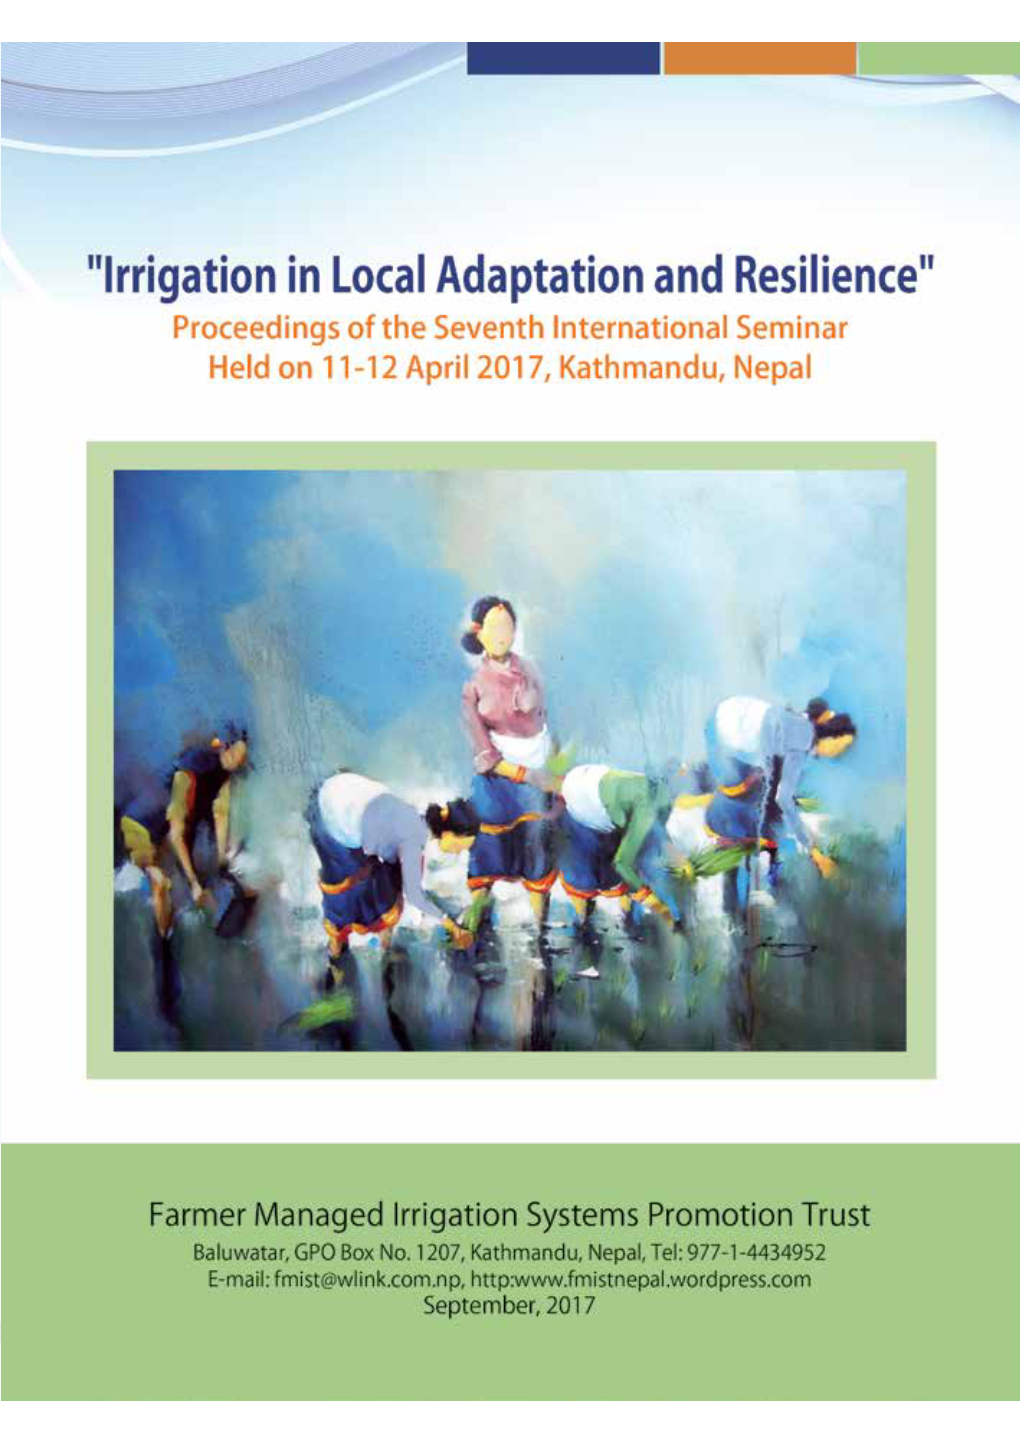 "Irrigation in Local Adaptation and Resilience"